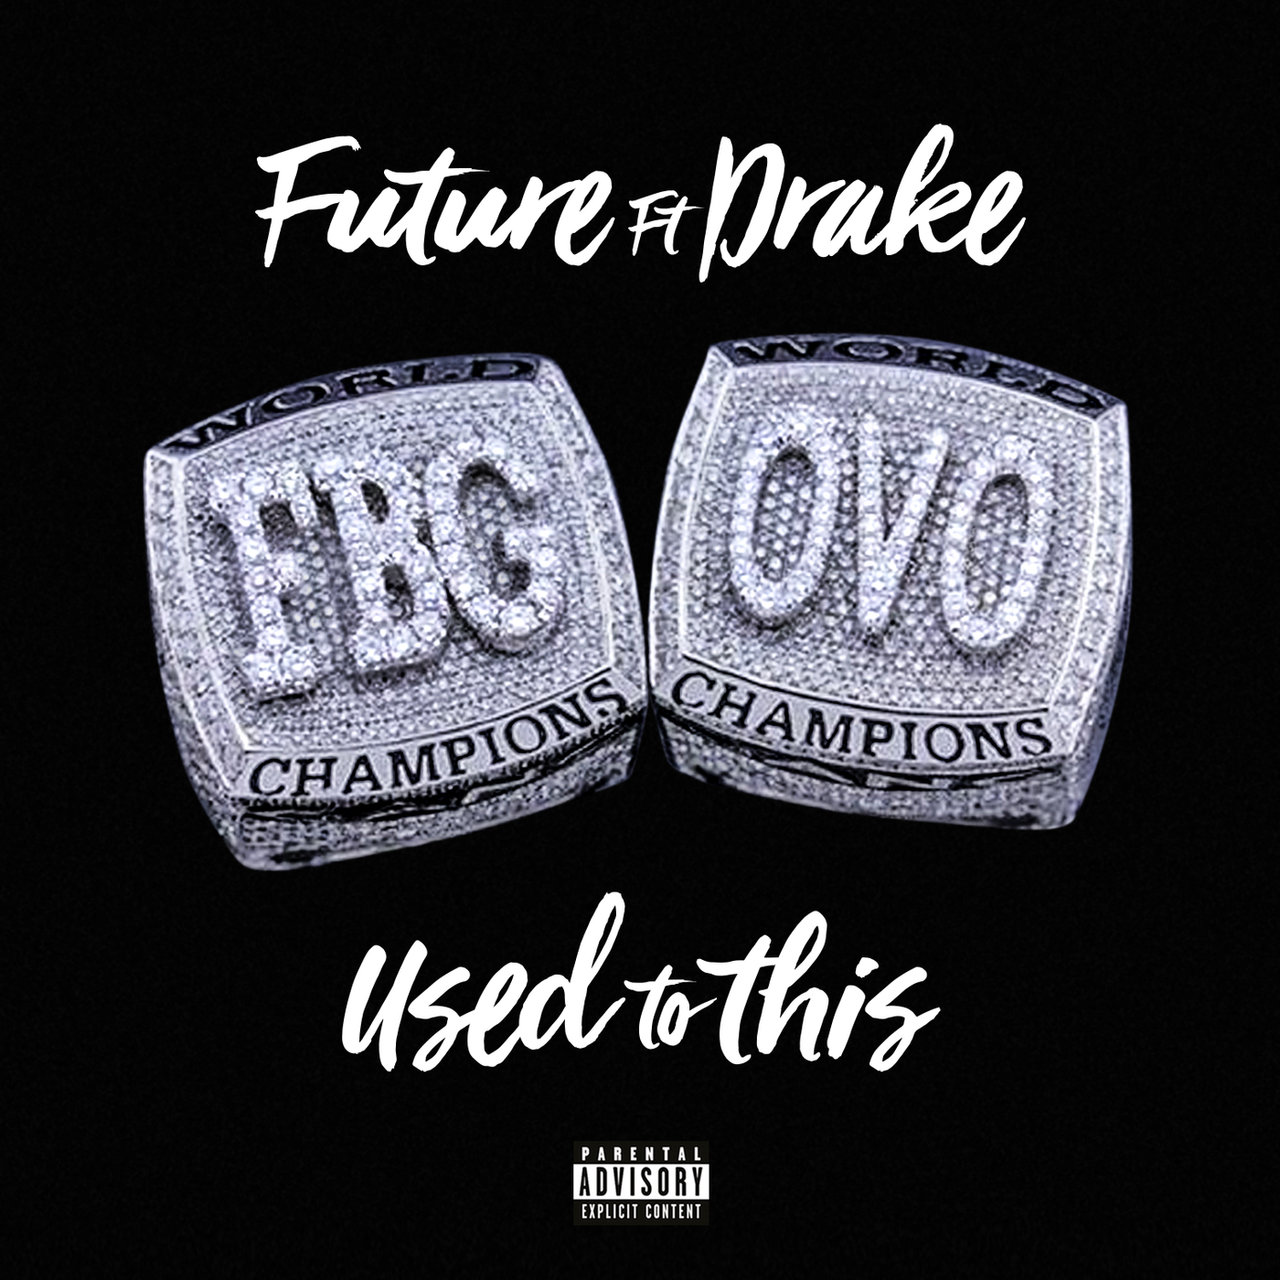 Used to This (feat. Drake) [2016]